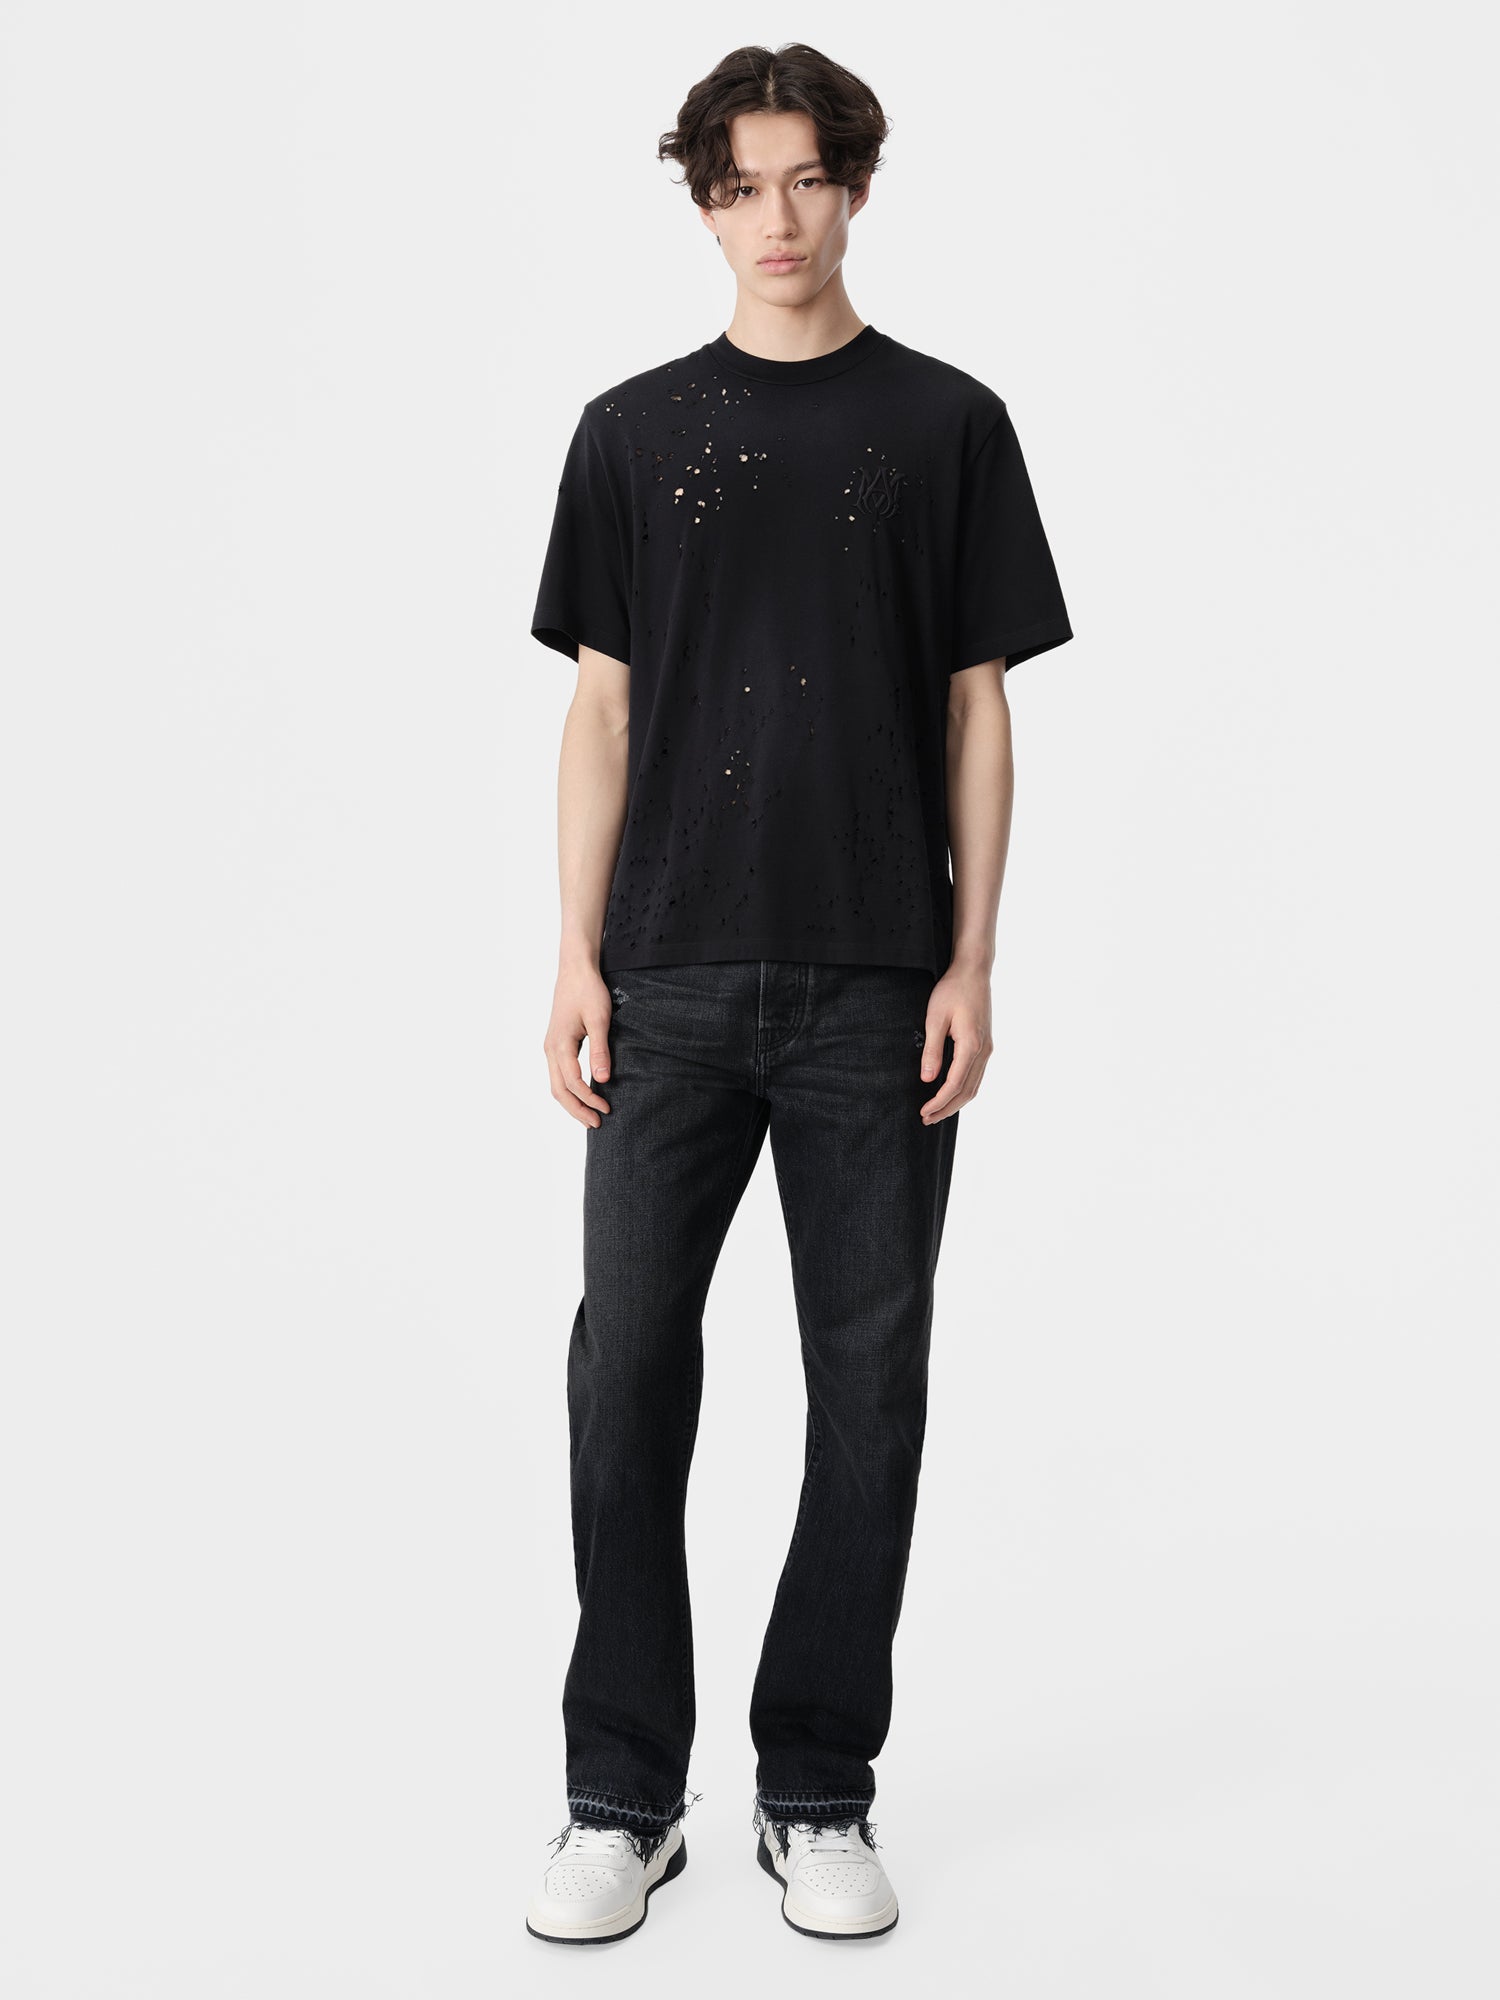 Product MA SHOTGUN EMBROIDERED TEE - Black featured image